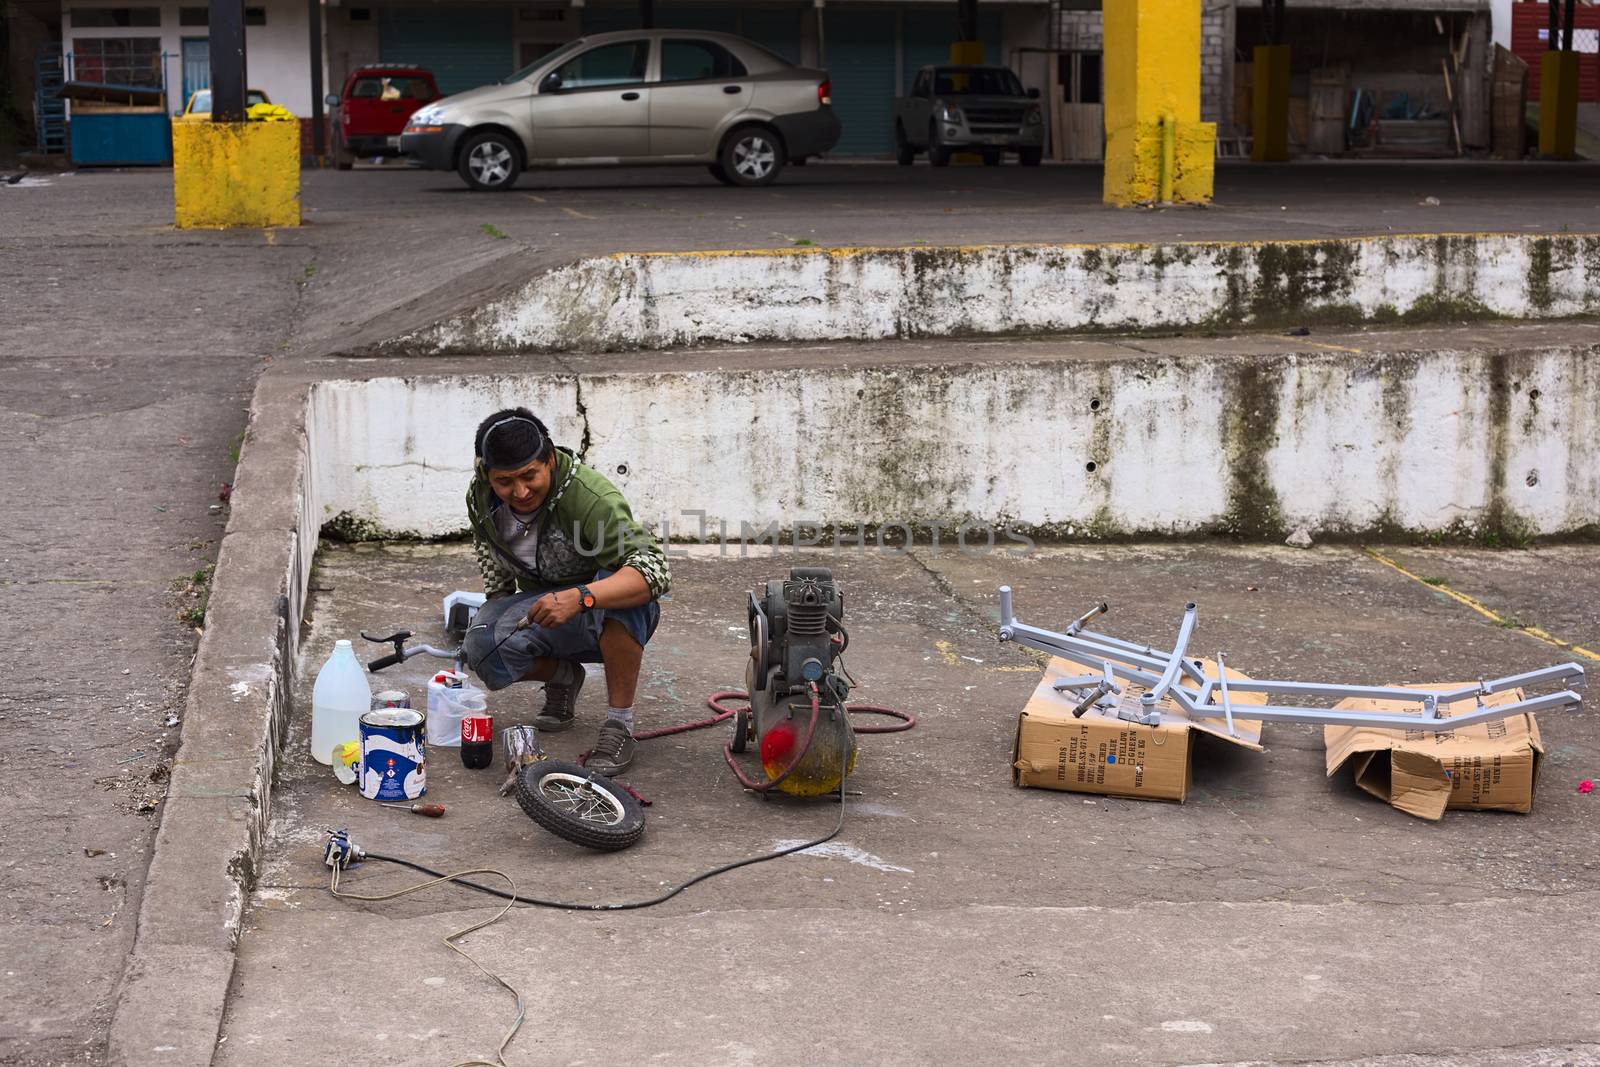 BANOS, ECUADOR - AUGUST 1, 2014: Unidentified person spraying a metal frame with grey color opposite a small bike repair shop on Juan Leon Mera street on August 1, 2014 in Banos, Ecuador. 